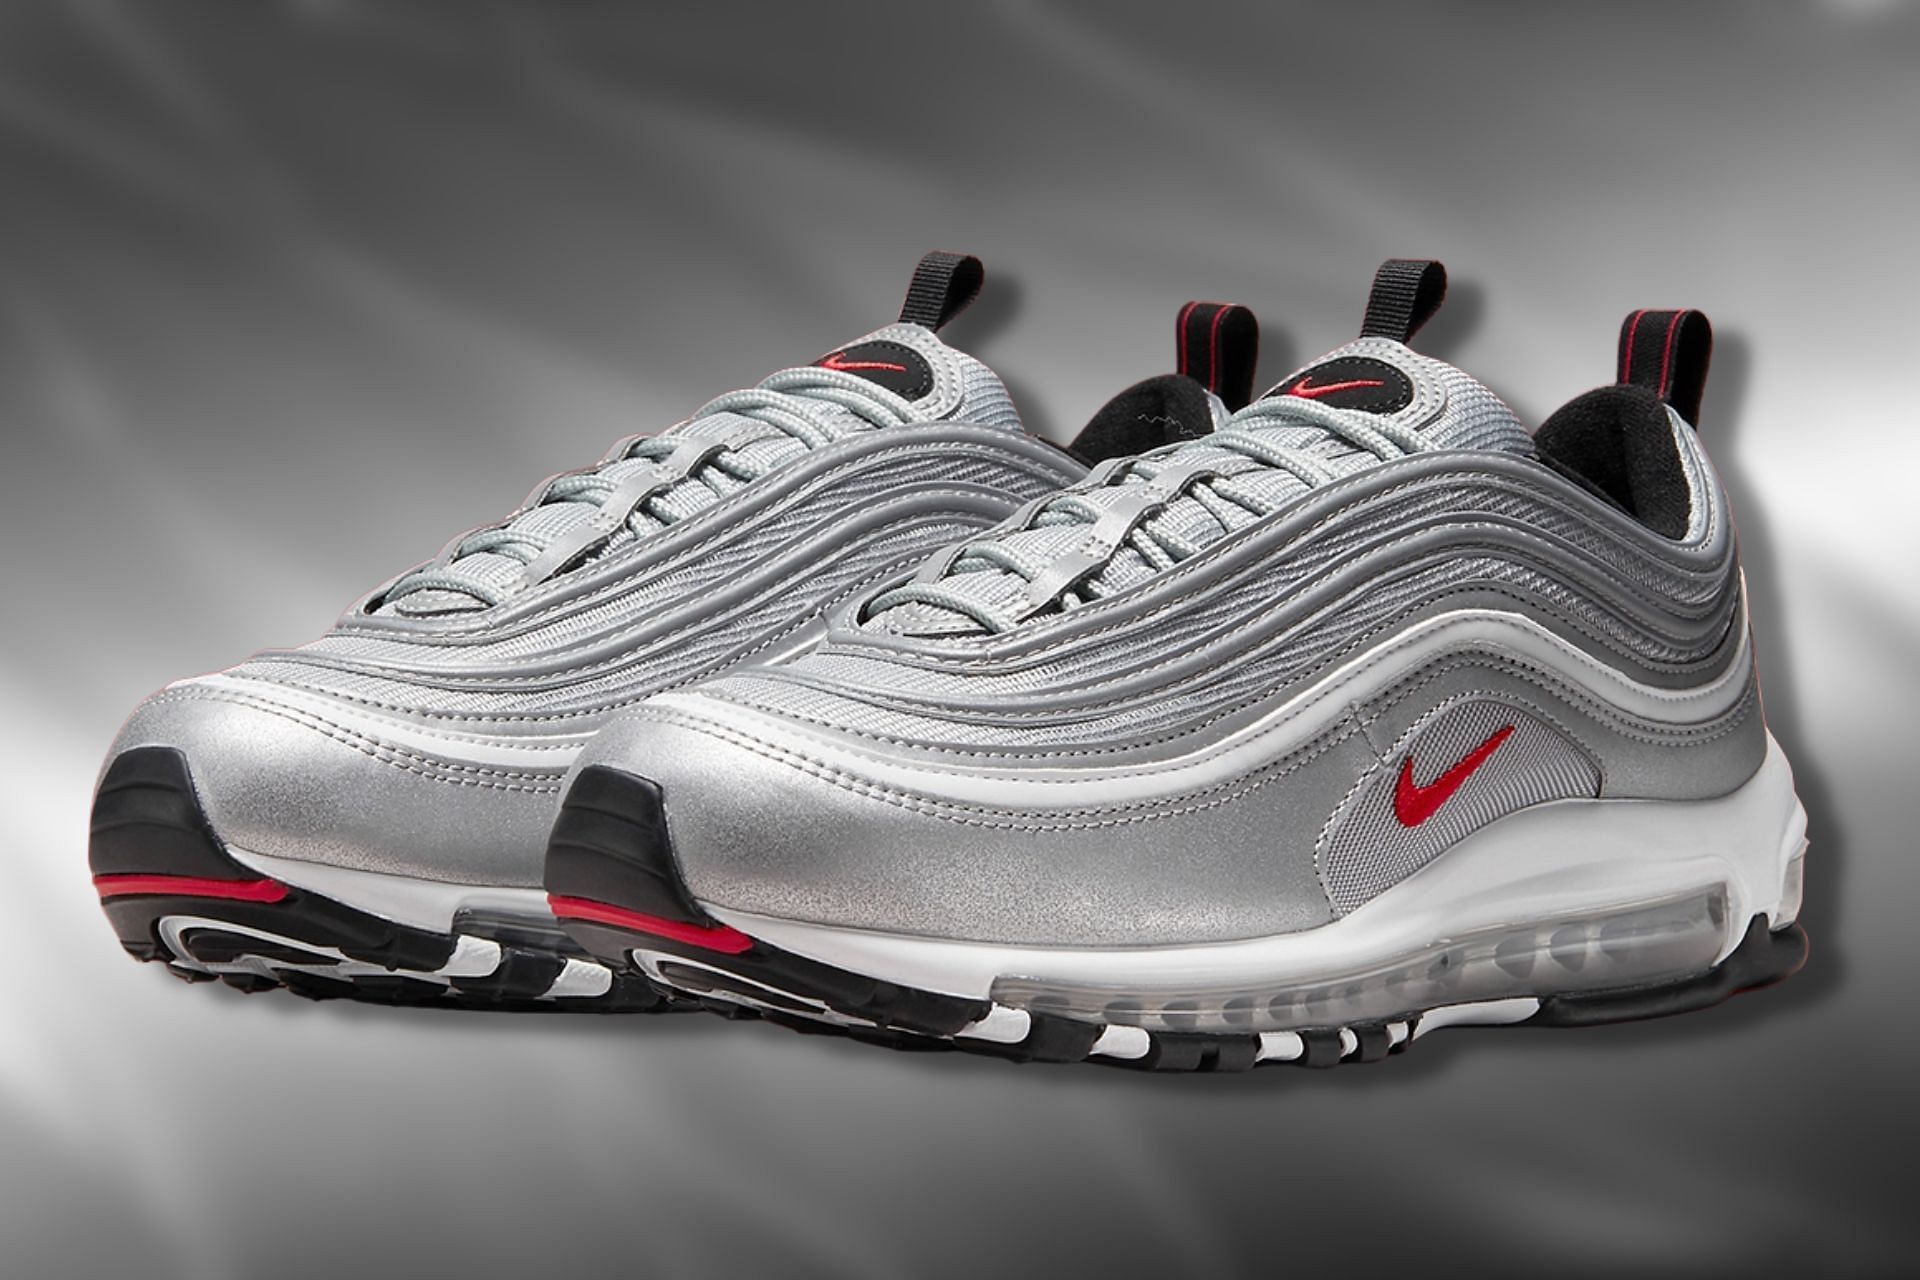 Where to buy Nike Air Max 97 Silver Bullet colorway? Price, release date, and more explored